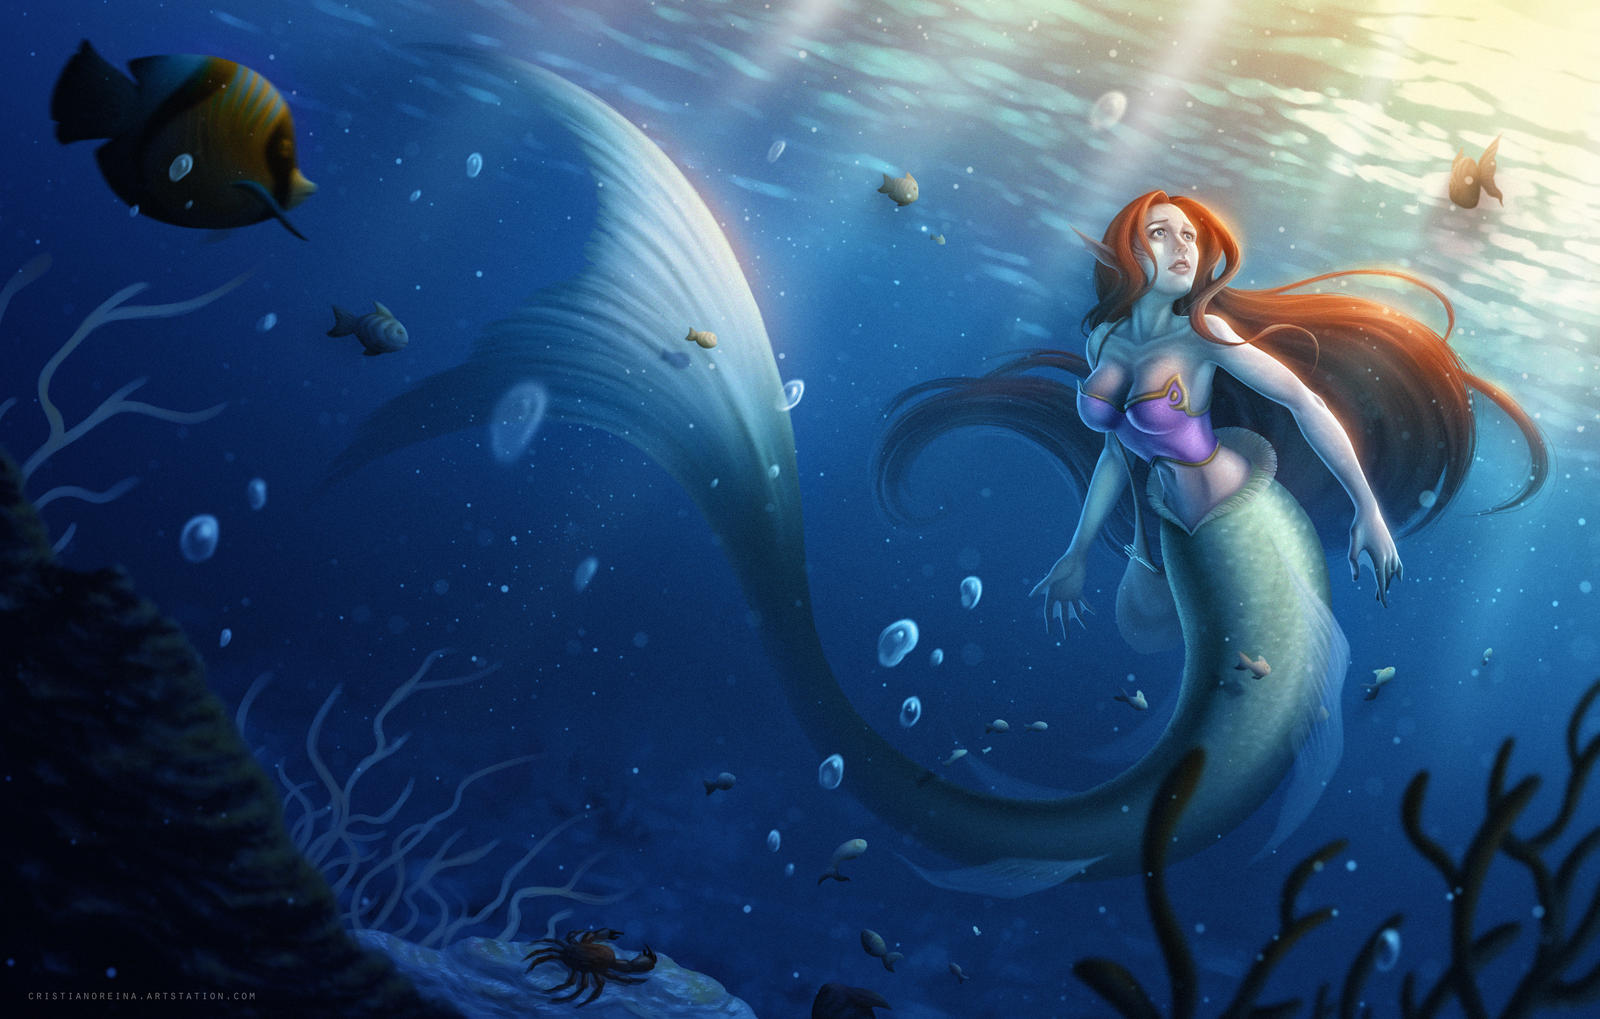 Under the sea - The little mermaid by CristianoReina on DeviantArt